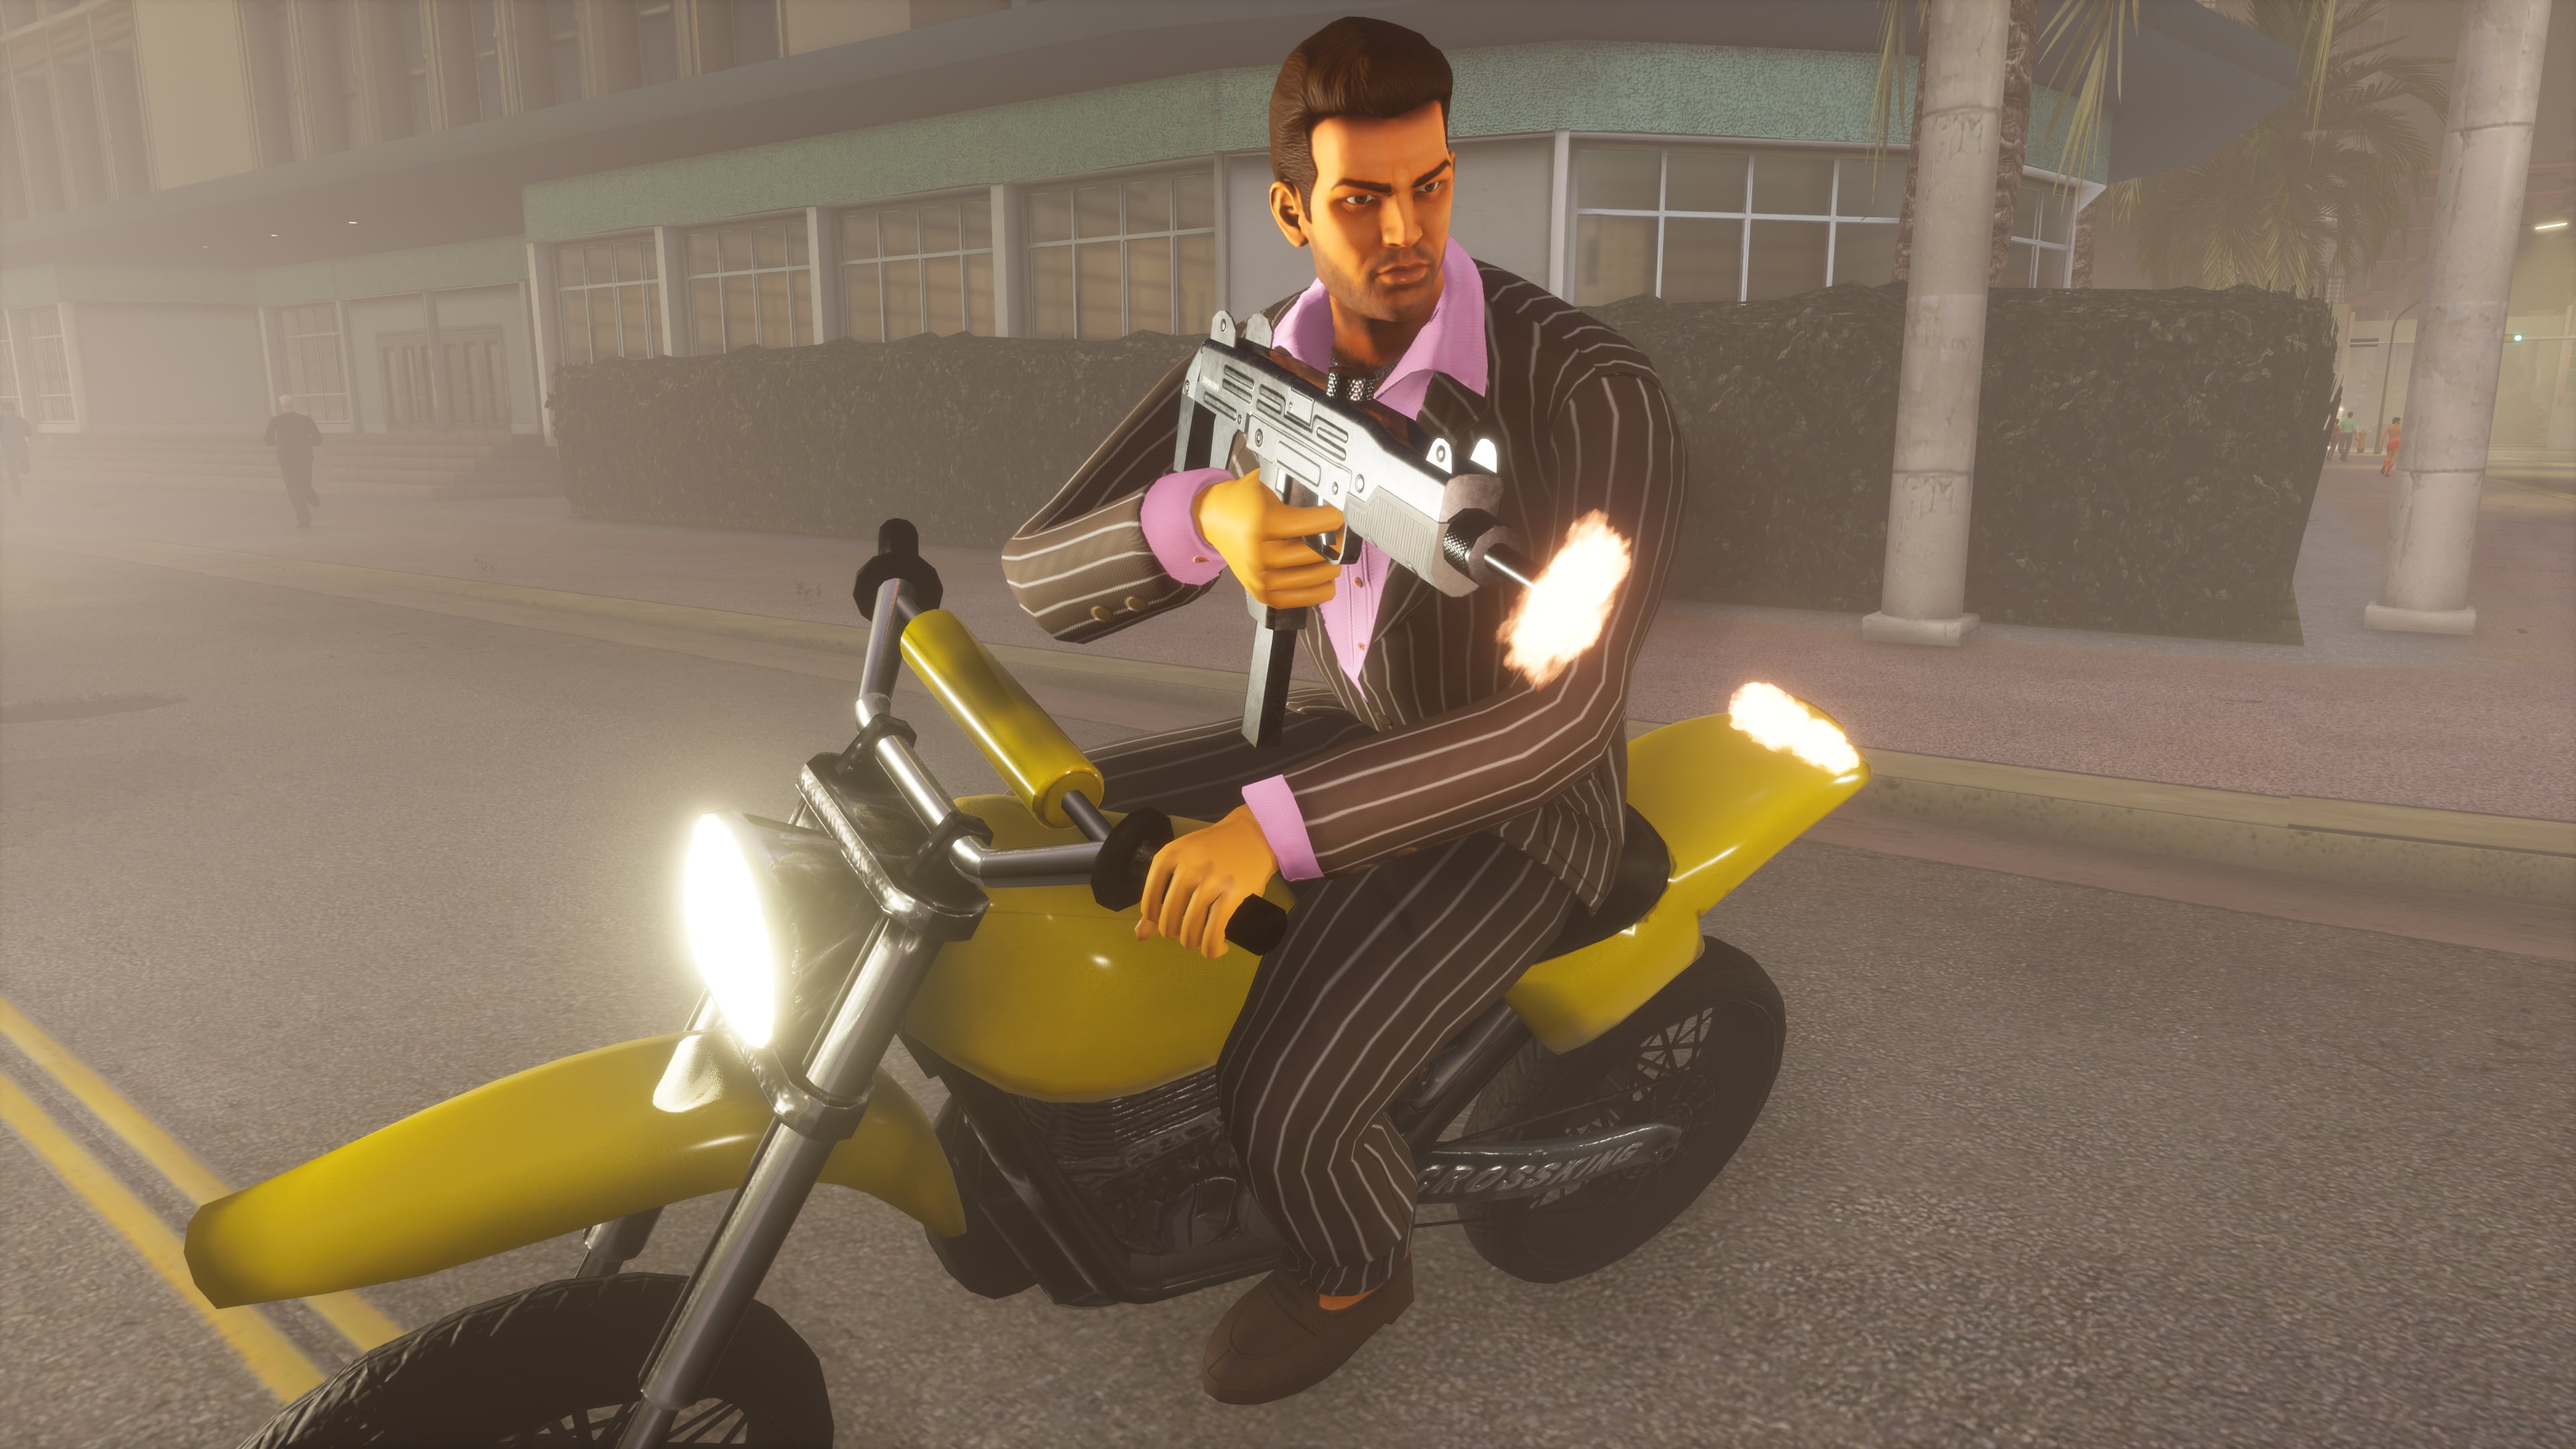 grand theft auto 4 pc download free full version ocean